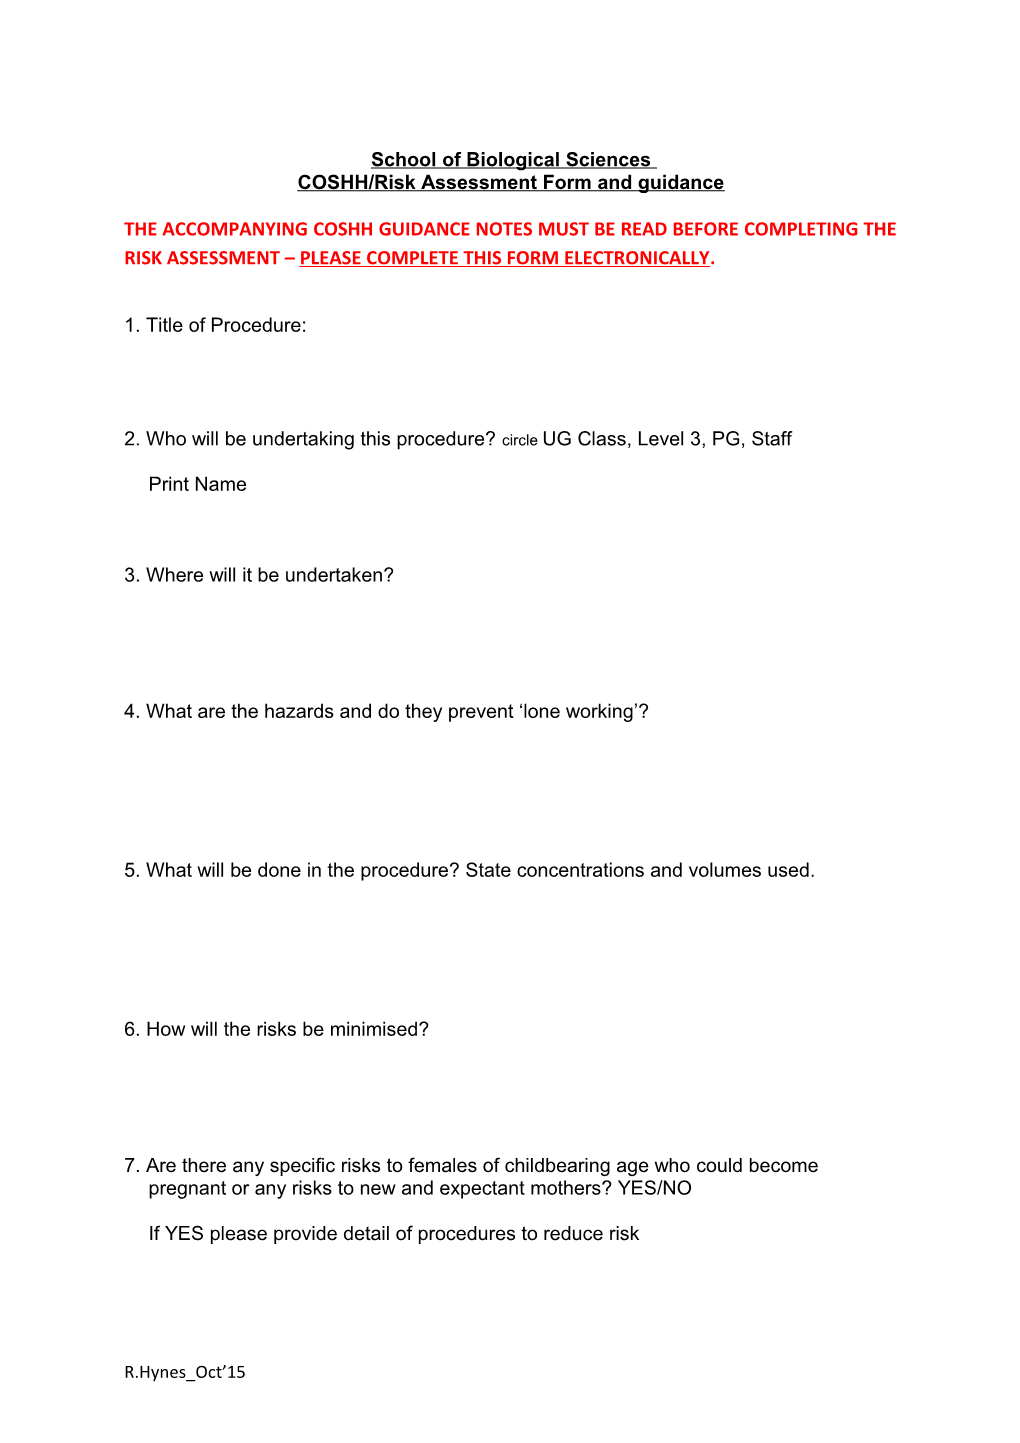 COSHH/Risk Assessment Form and Guidance